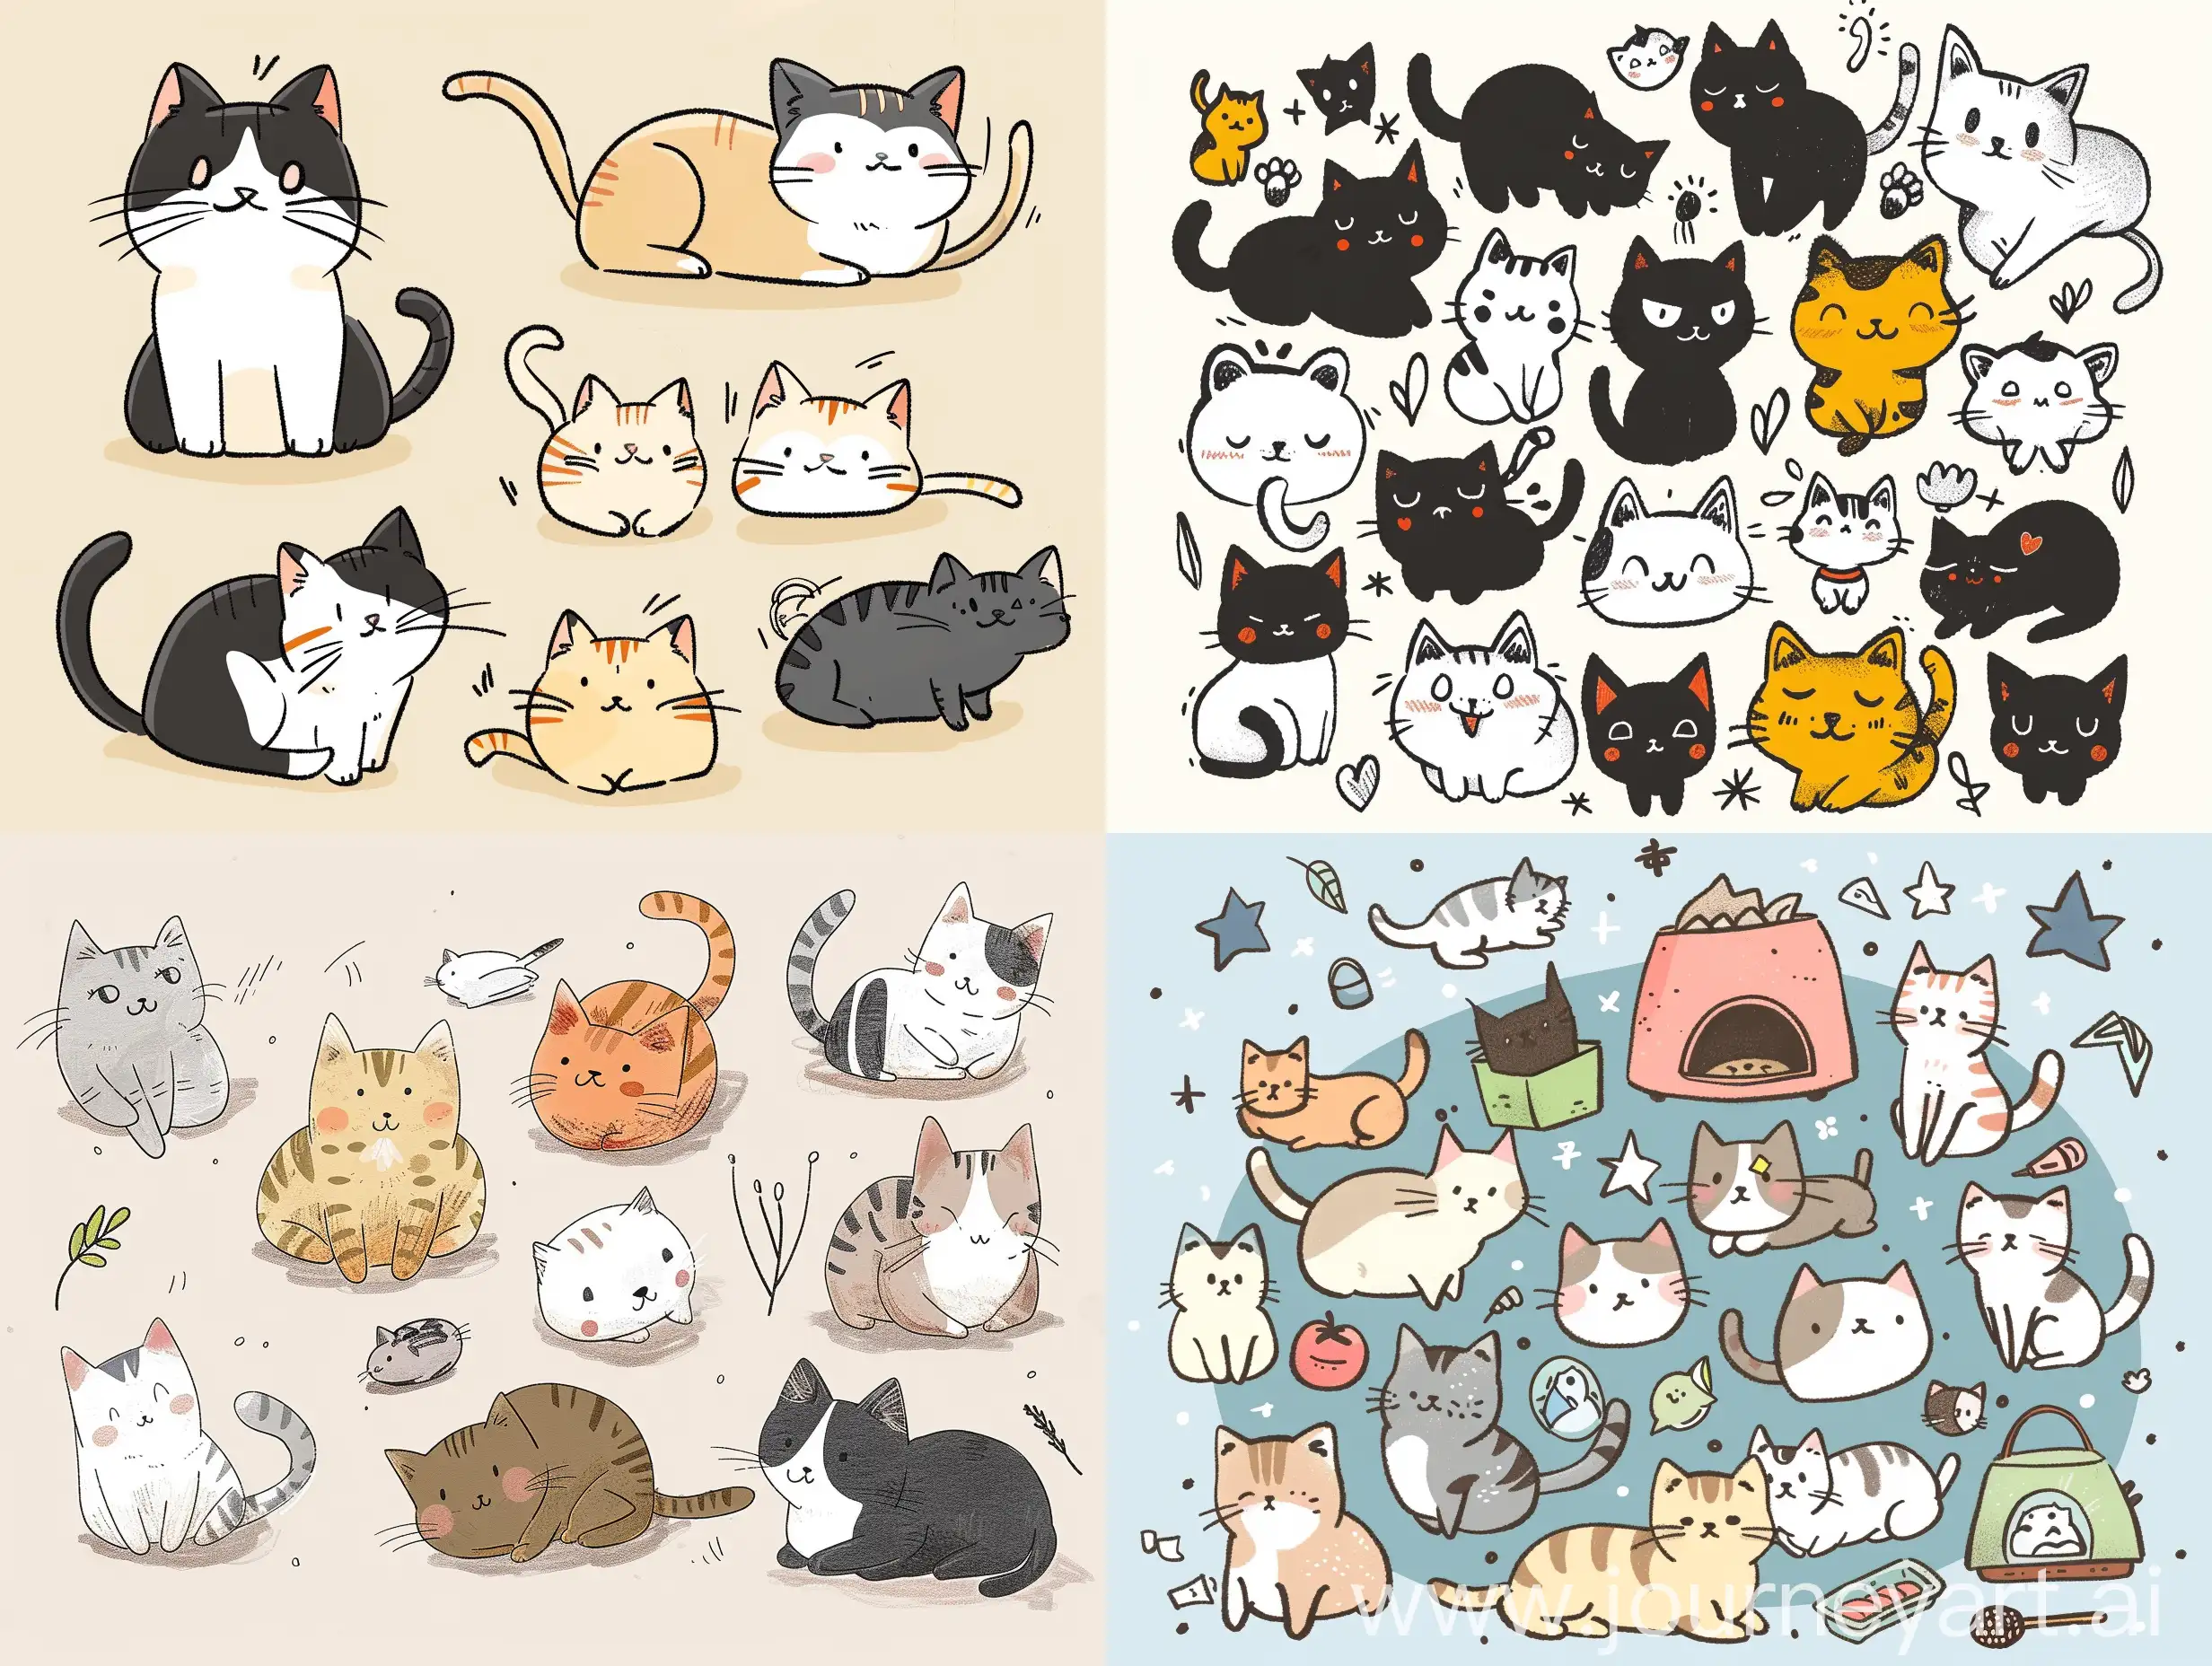 illustration of cute cats, doodle style, japan style